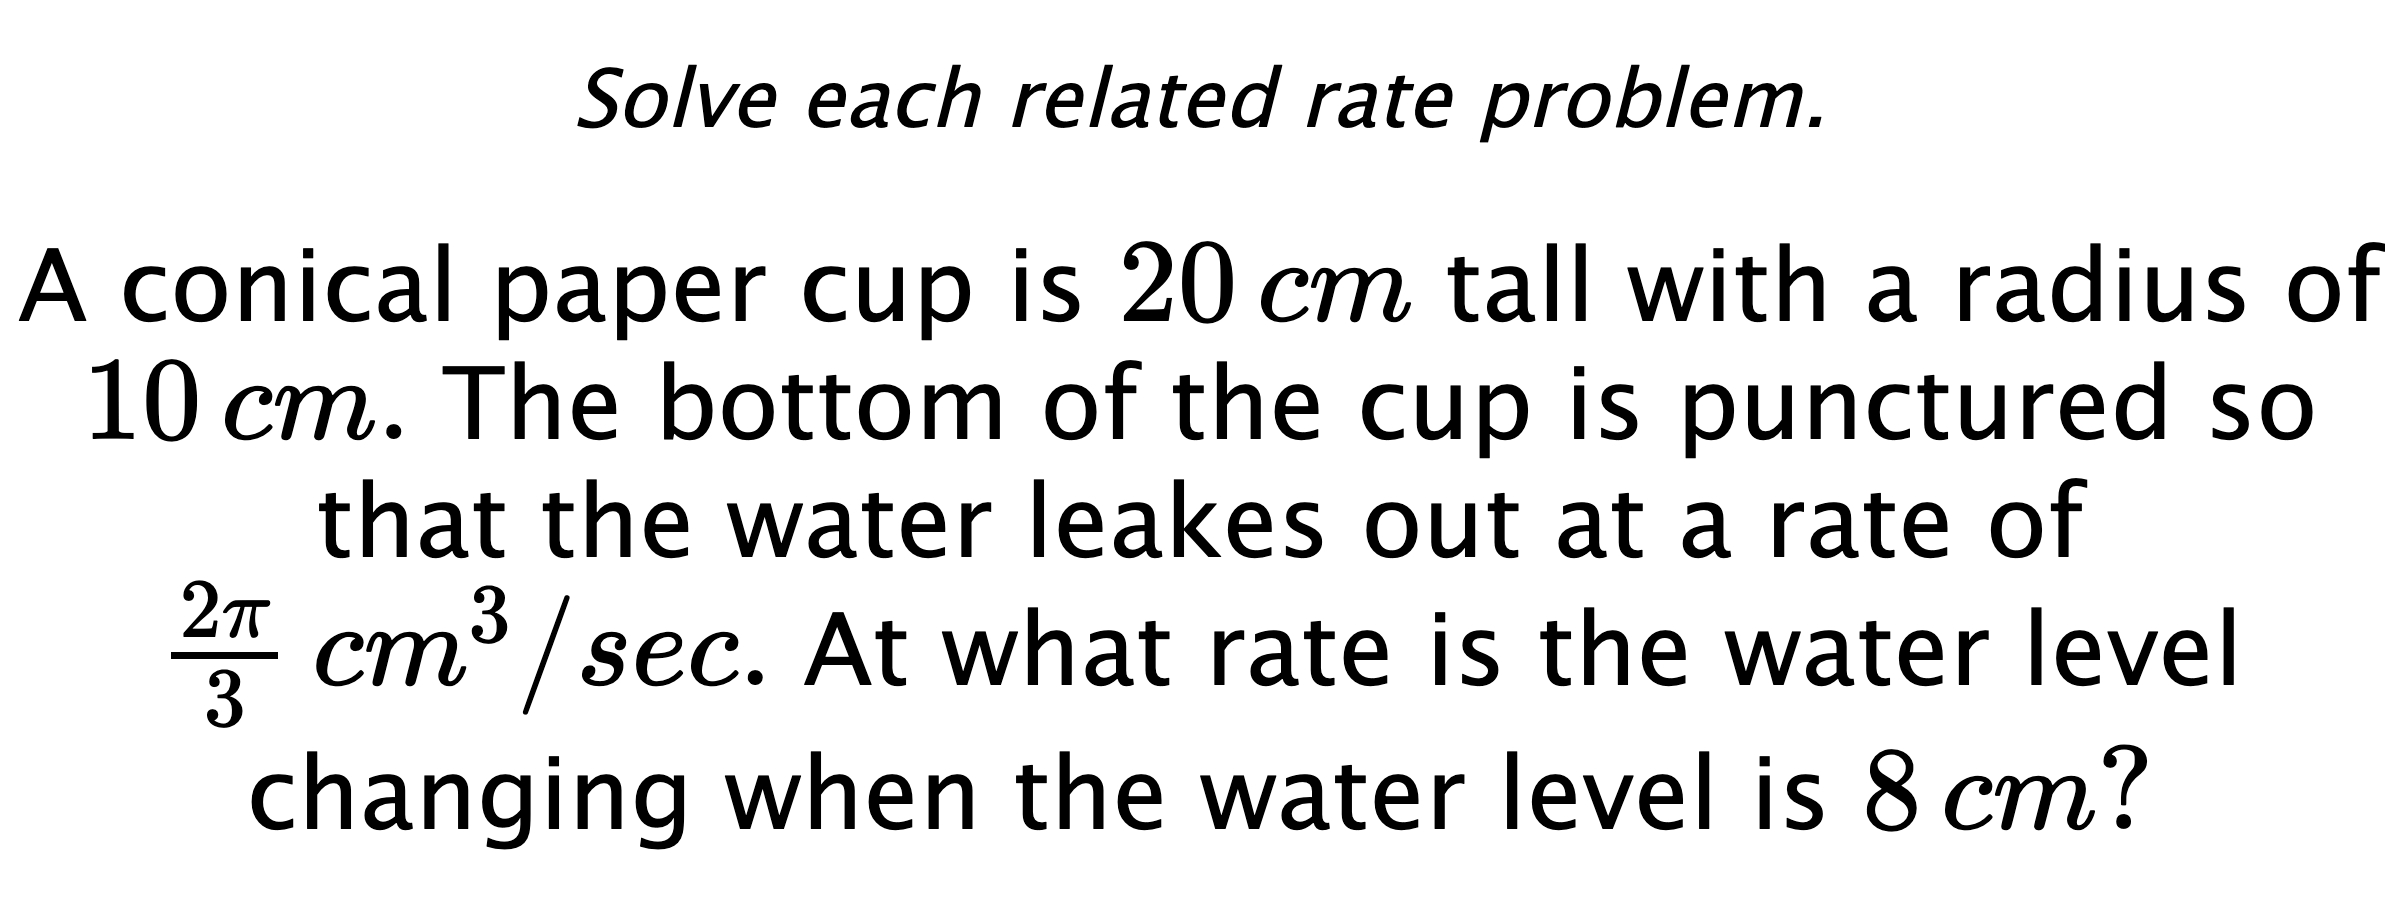 Solve each related rate problem. A conical paper cup is $20\,cm$ tall with a radius of $10\,cm.$ The bottom of the cup is punctured so that the water leakes out at a rate of $\frac{2\pi}{3} \,cm^{3}/sec.$ At what rate is the water level changing when the water level is $8\,cm?$